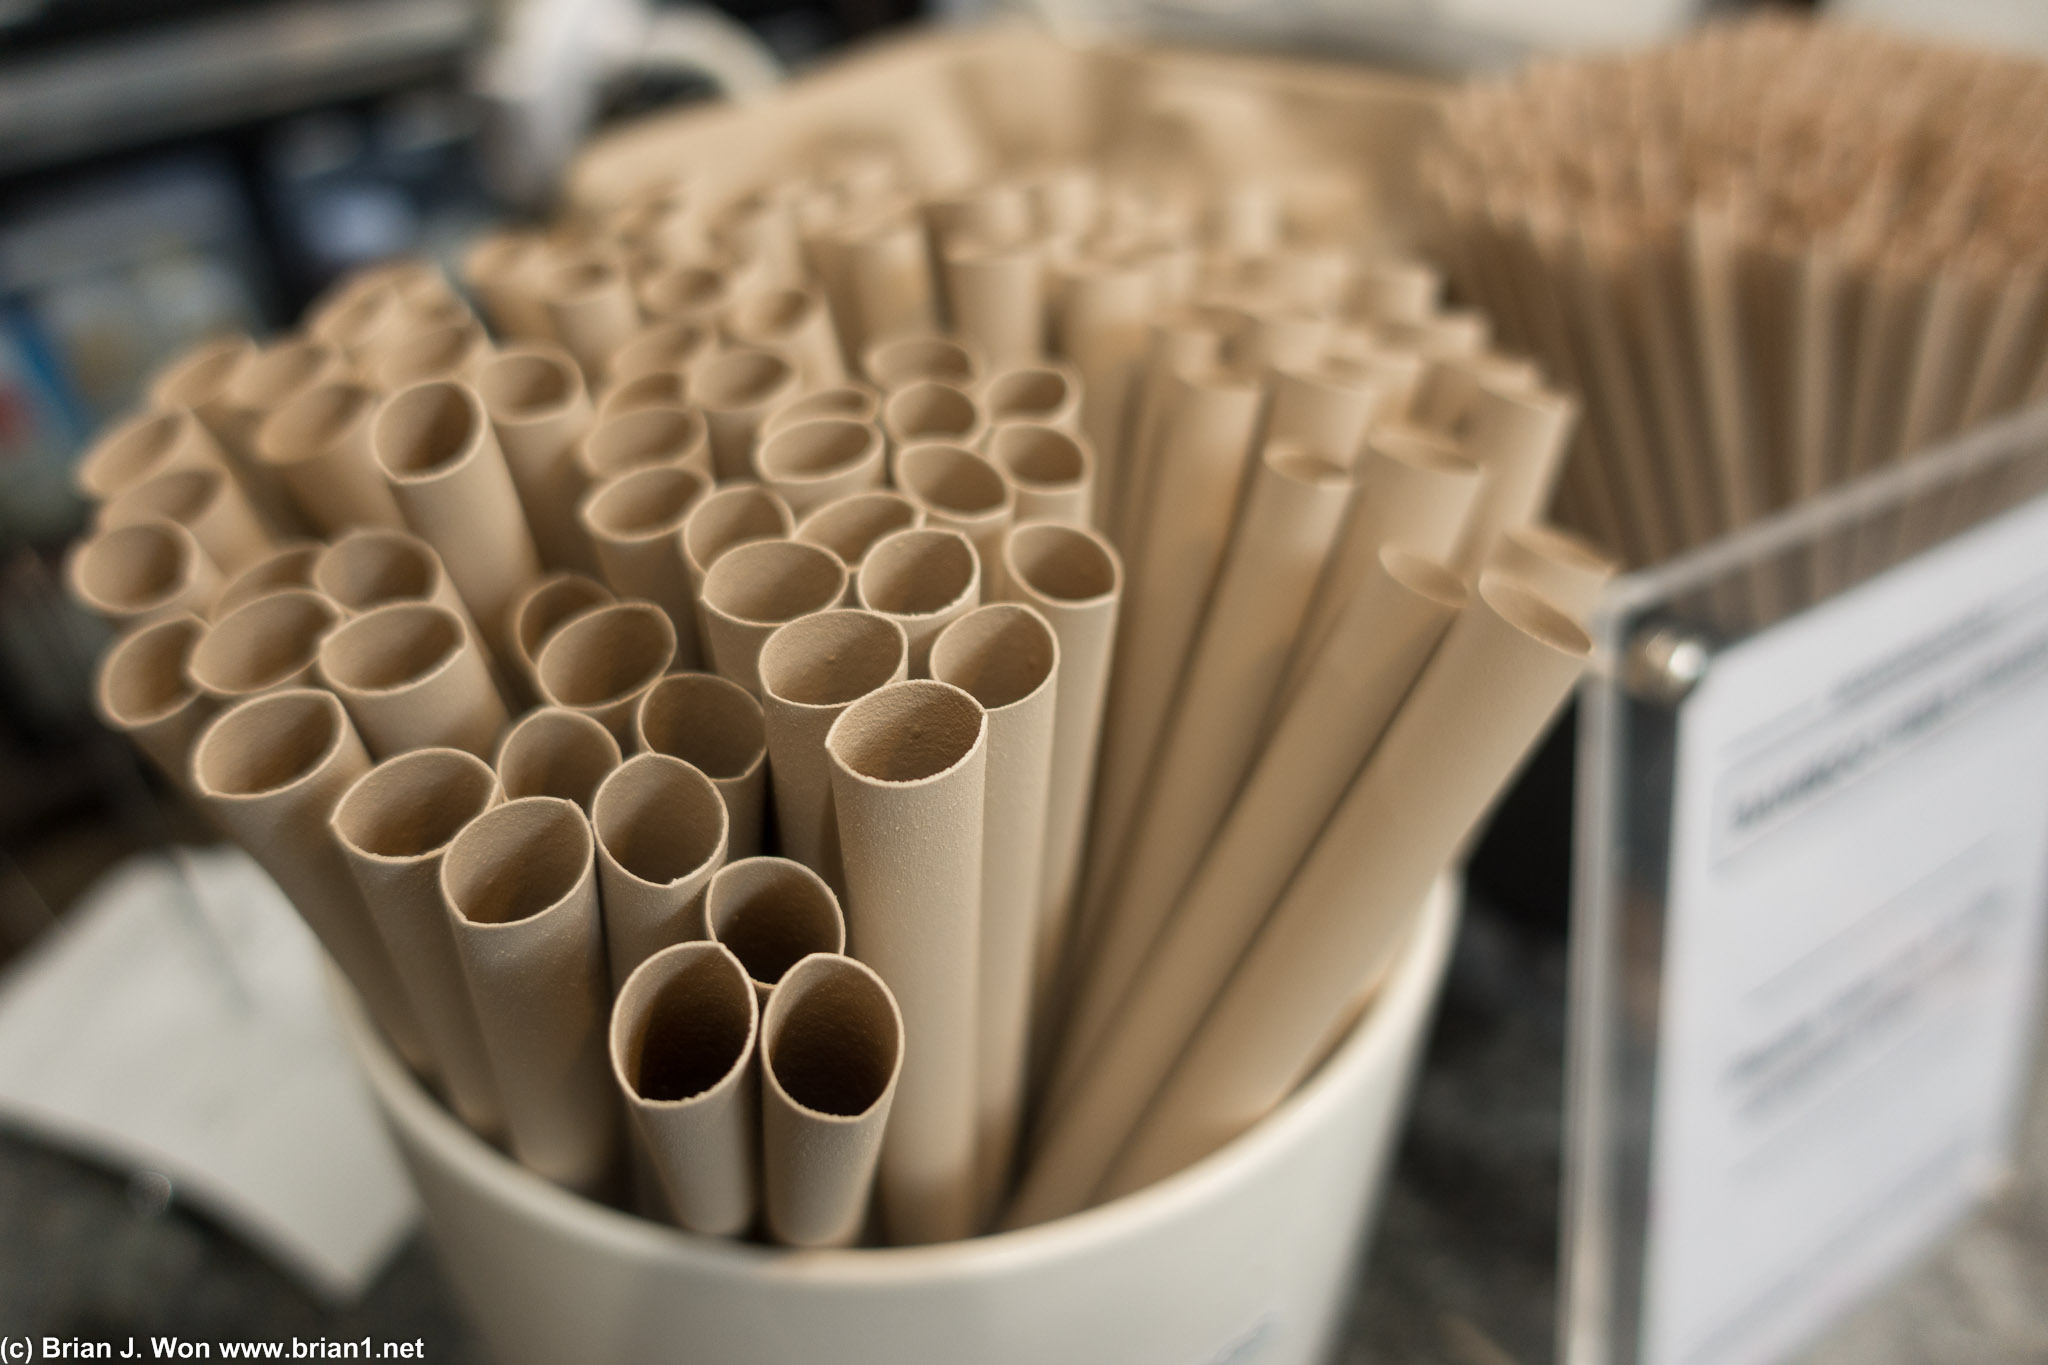 Paper straws if you forgot your reusable straw.